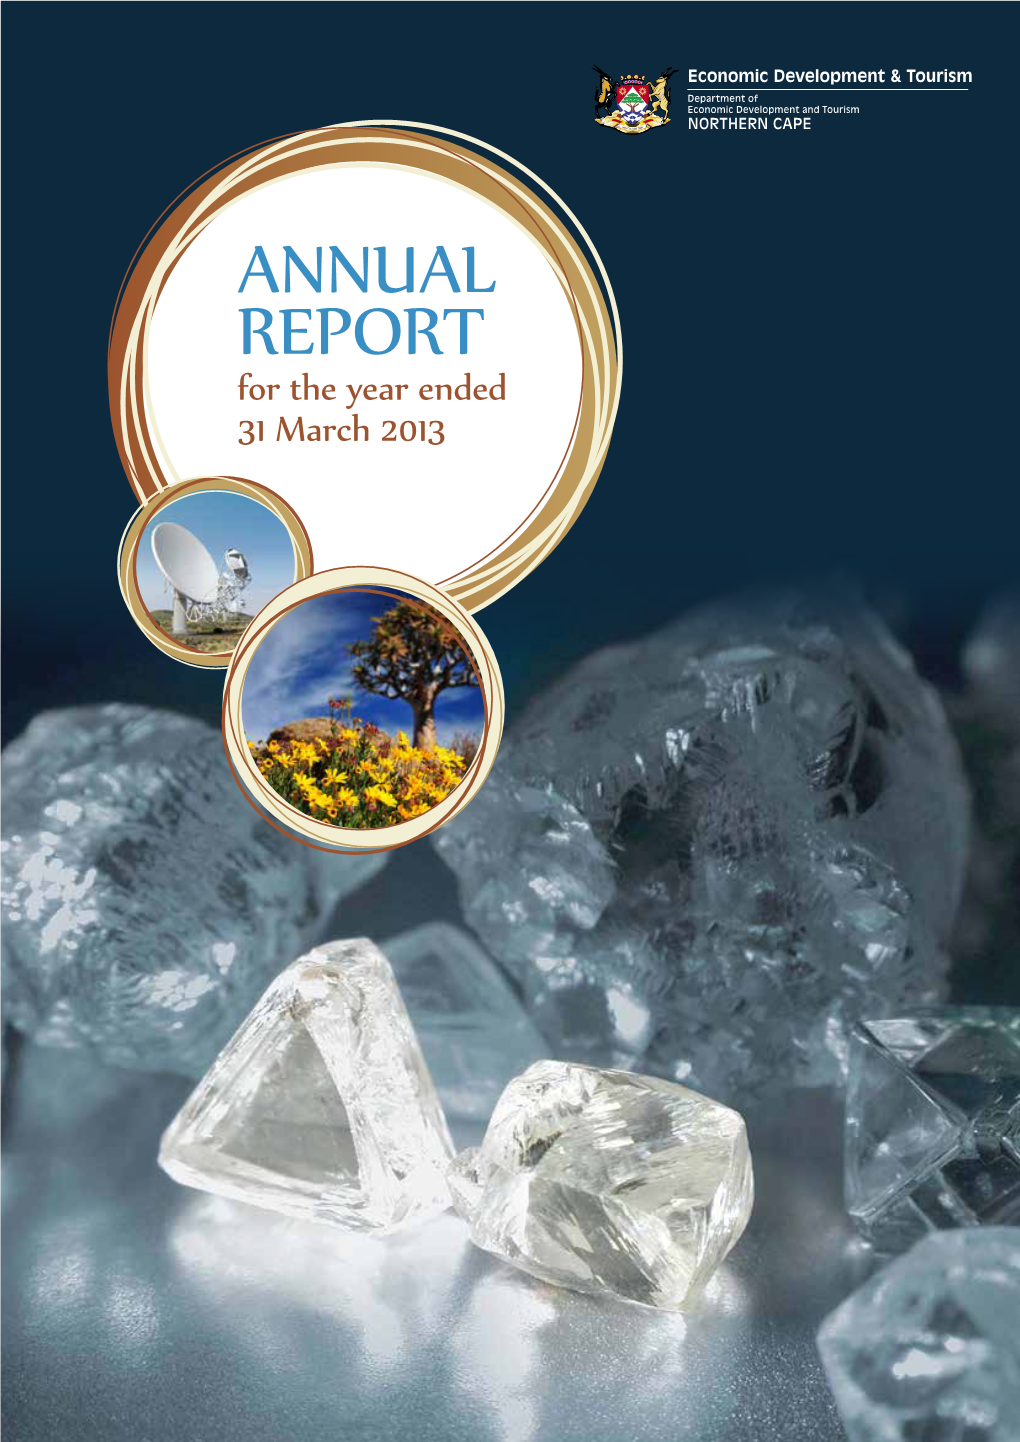 ANNUAL REPORT for the Year Ended 31 March 2013